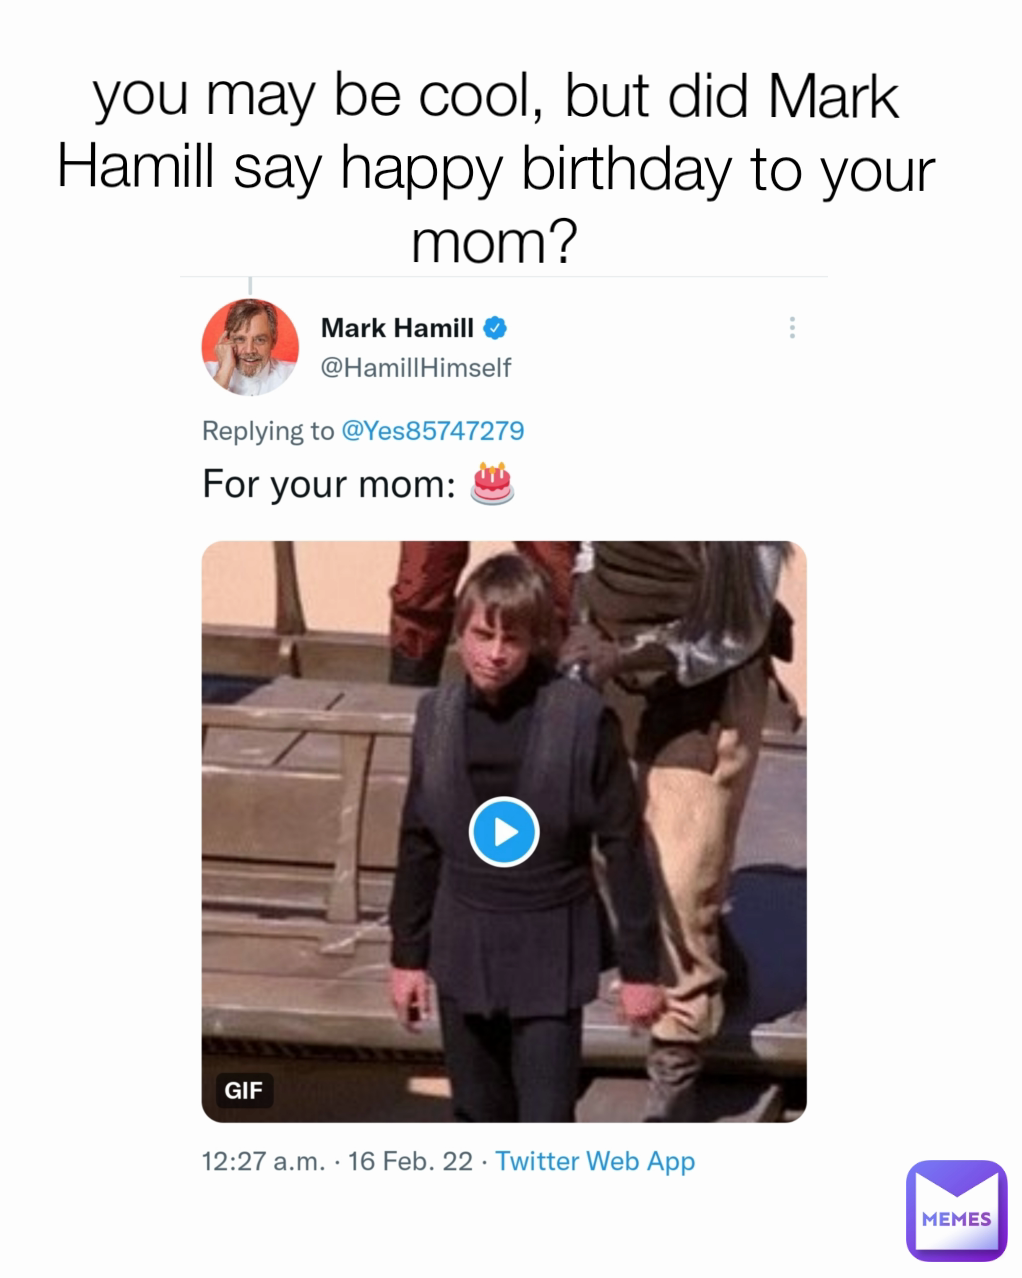 you may be cool, but did Mark Hamill say happy birthday to your mom?